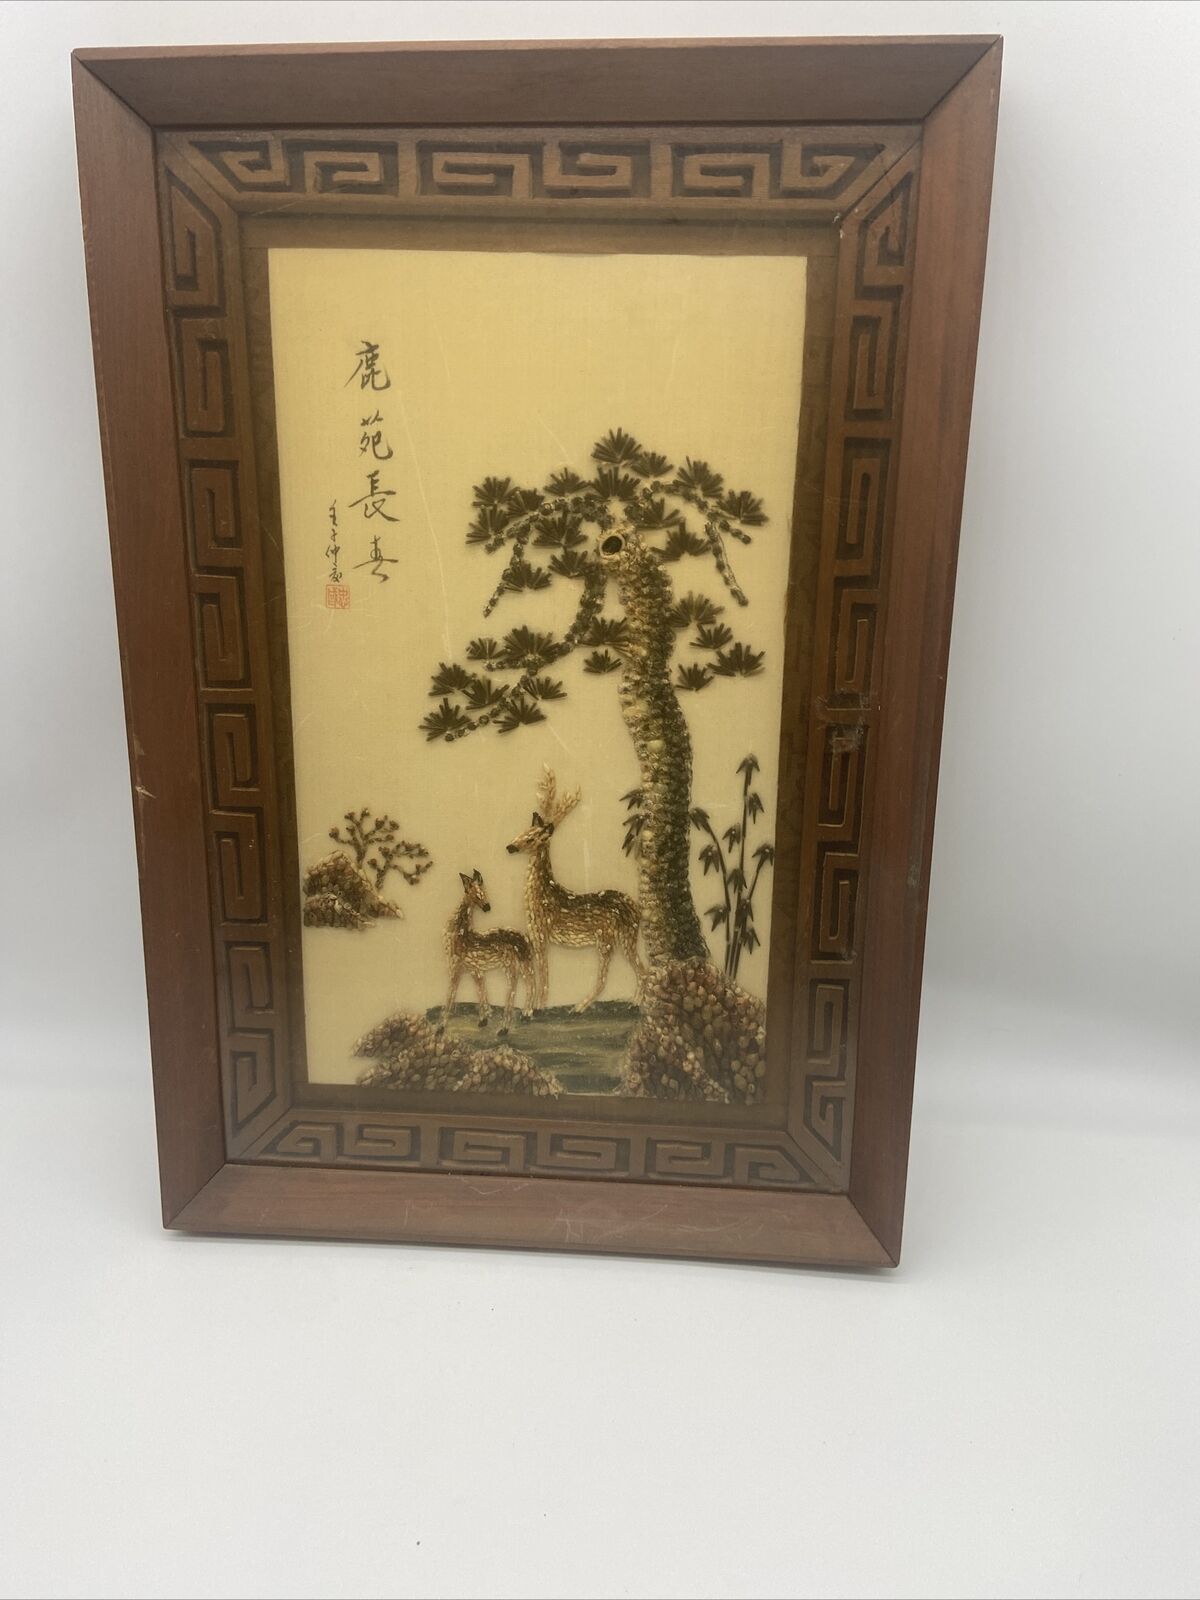 vintage oriental asian shell art deer with tree made of tiny shells